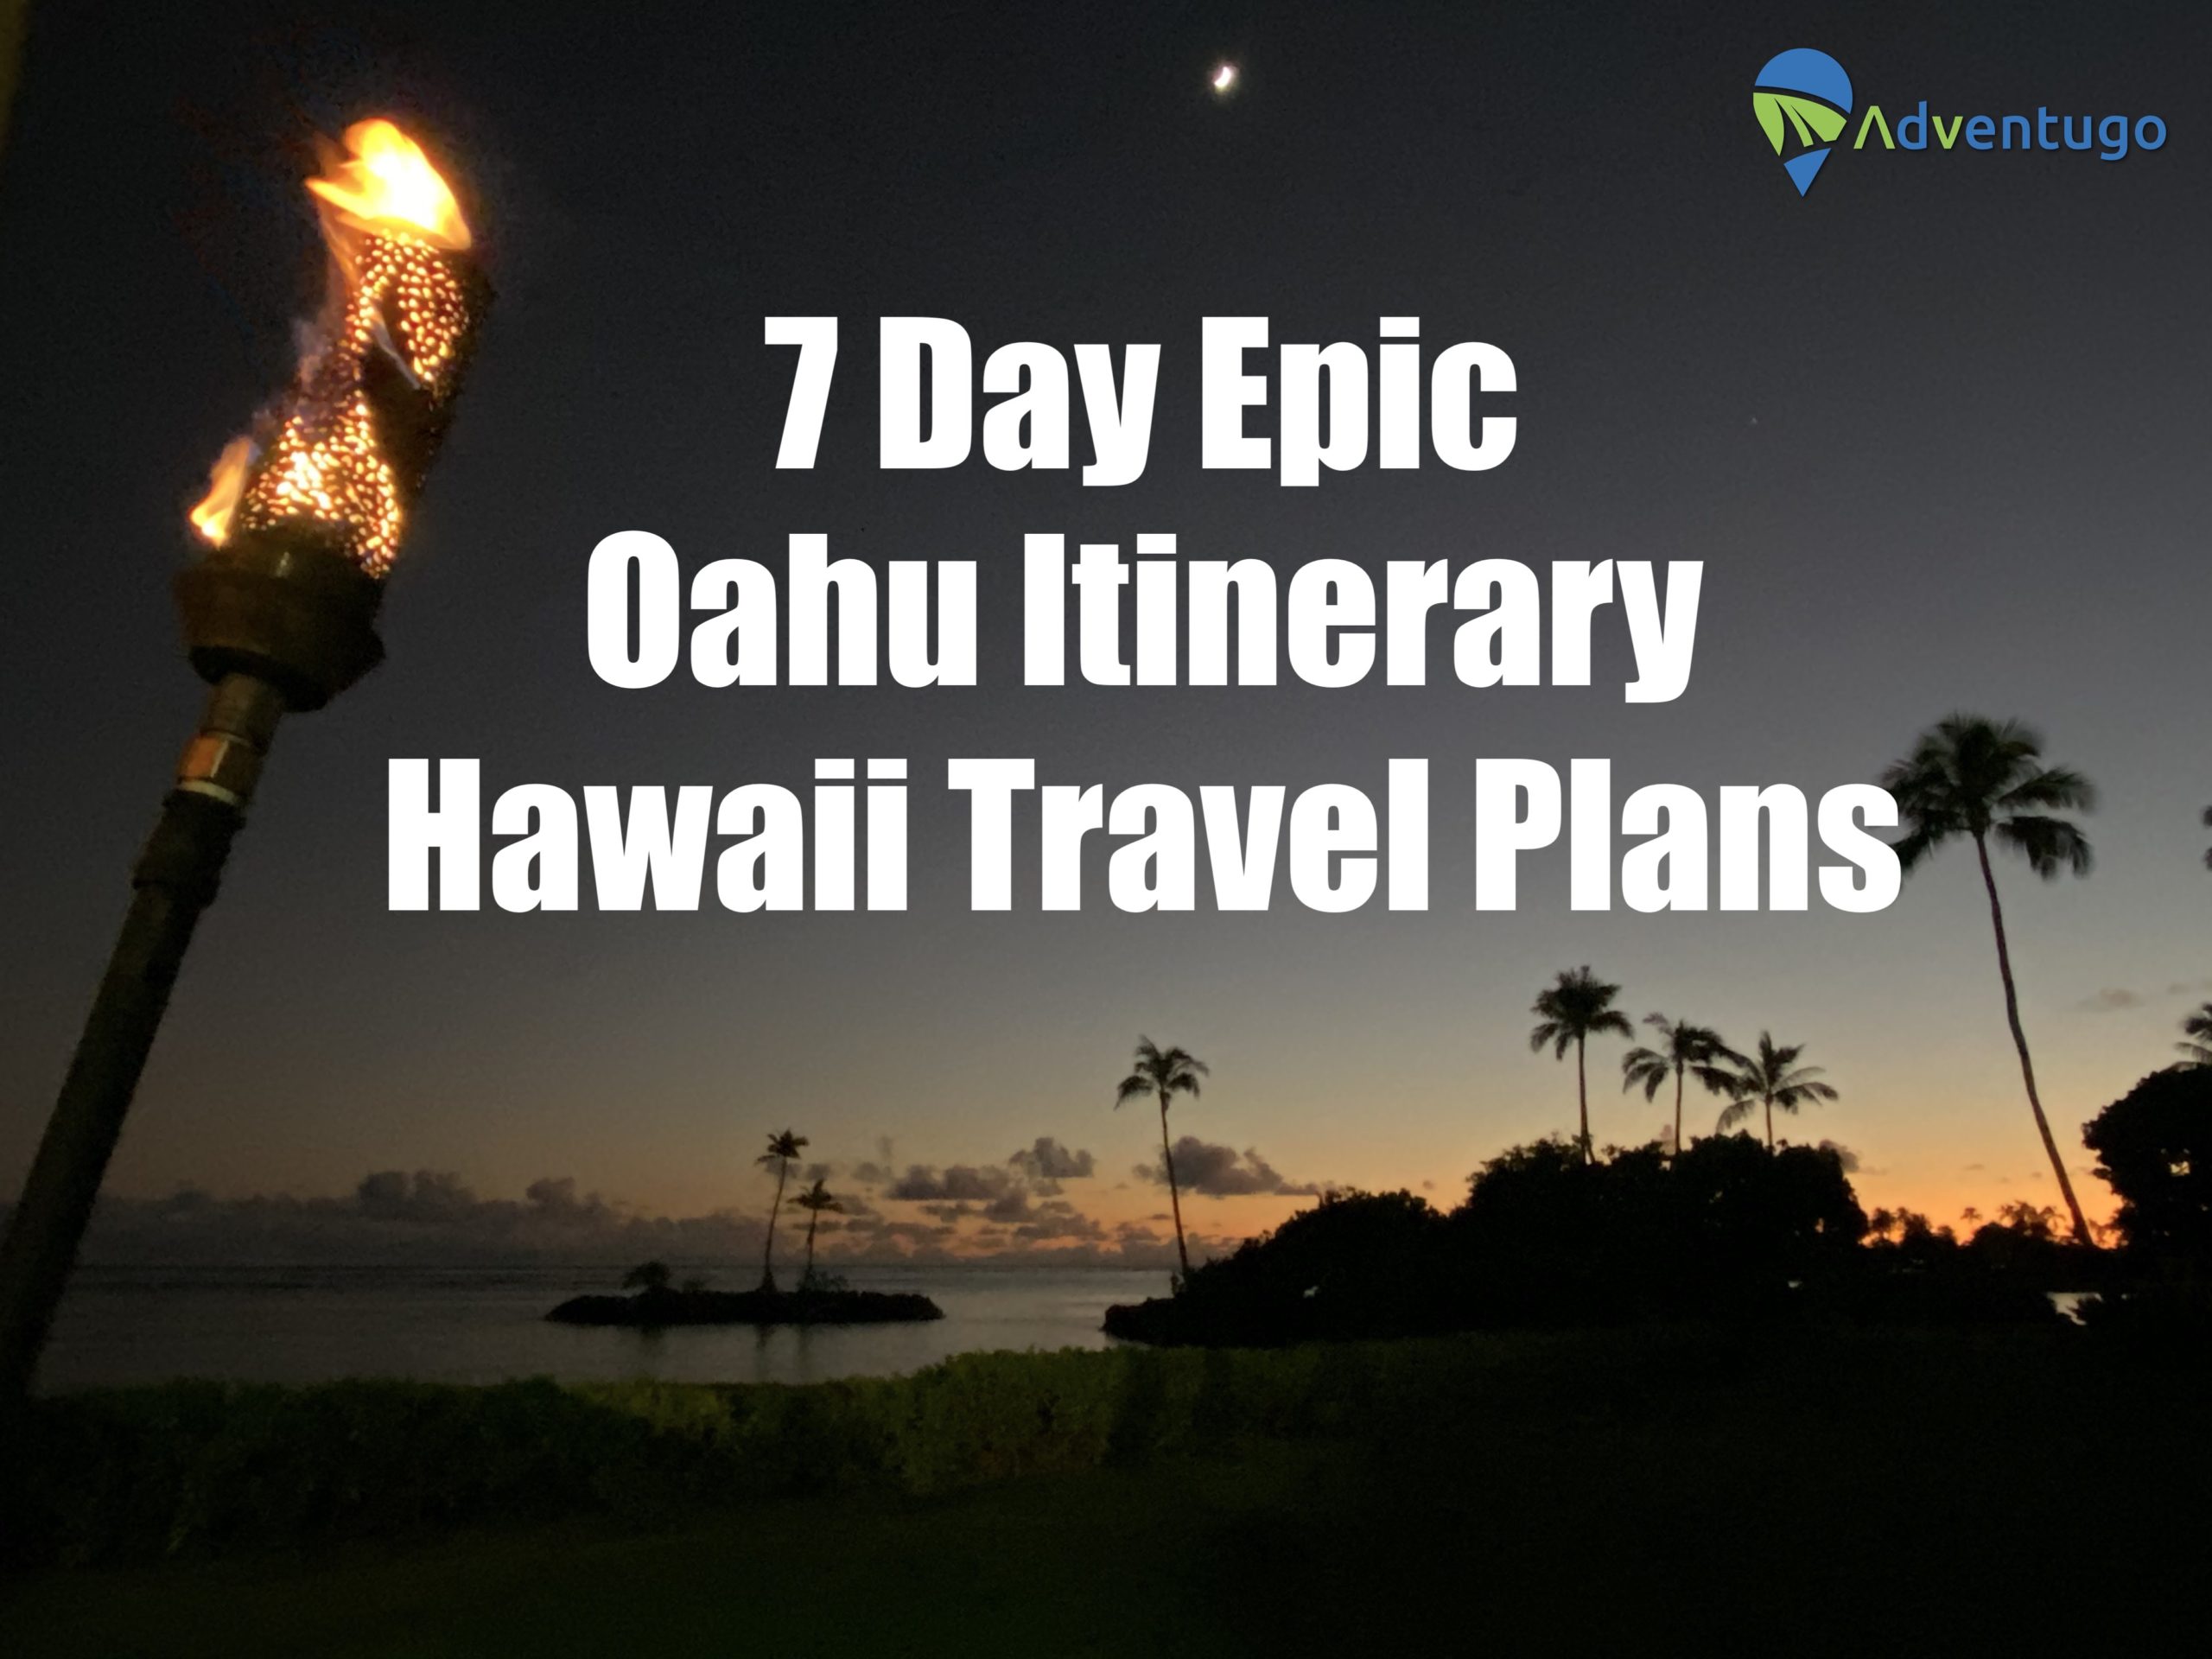 7 day oahu itinerary, Hawaii Travel Plans